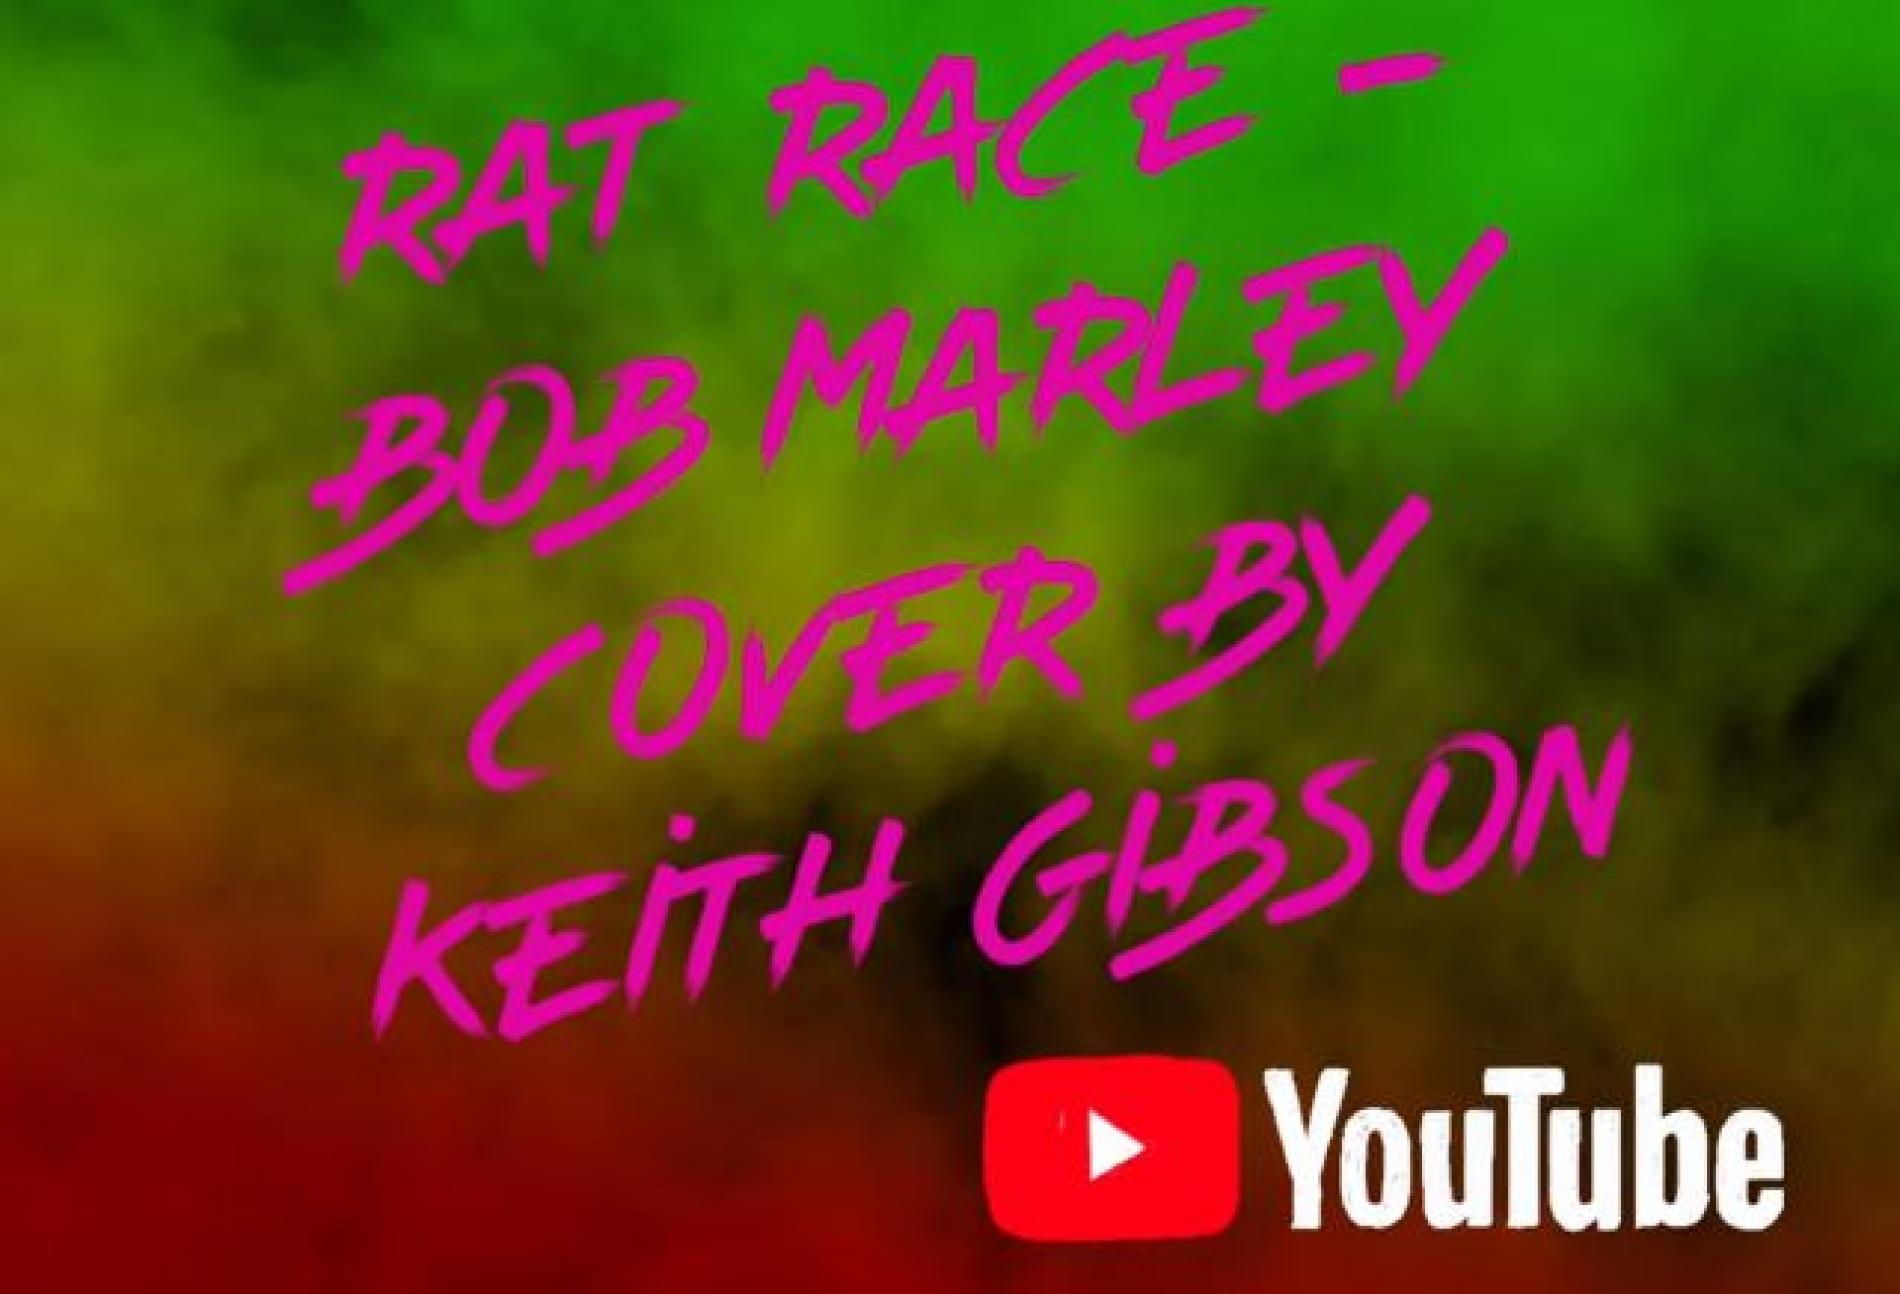 New Music : Rat Race Cover By Keith Gibson